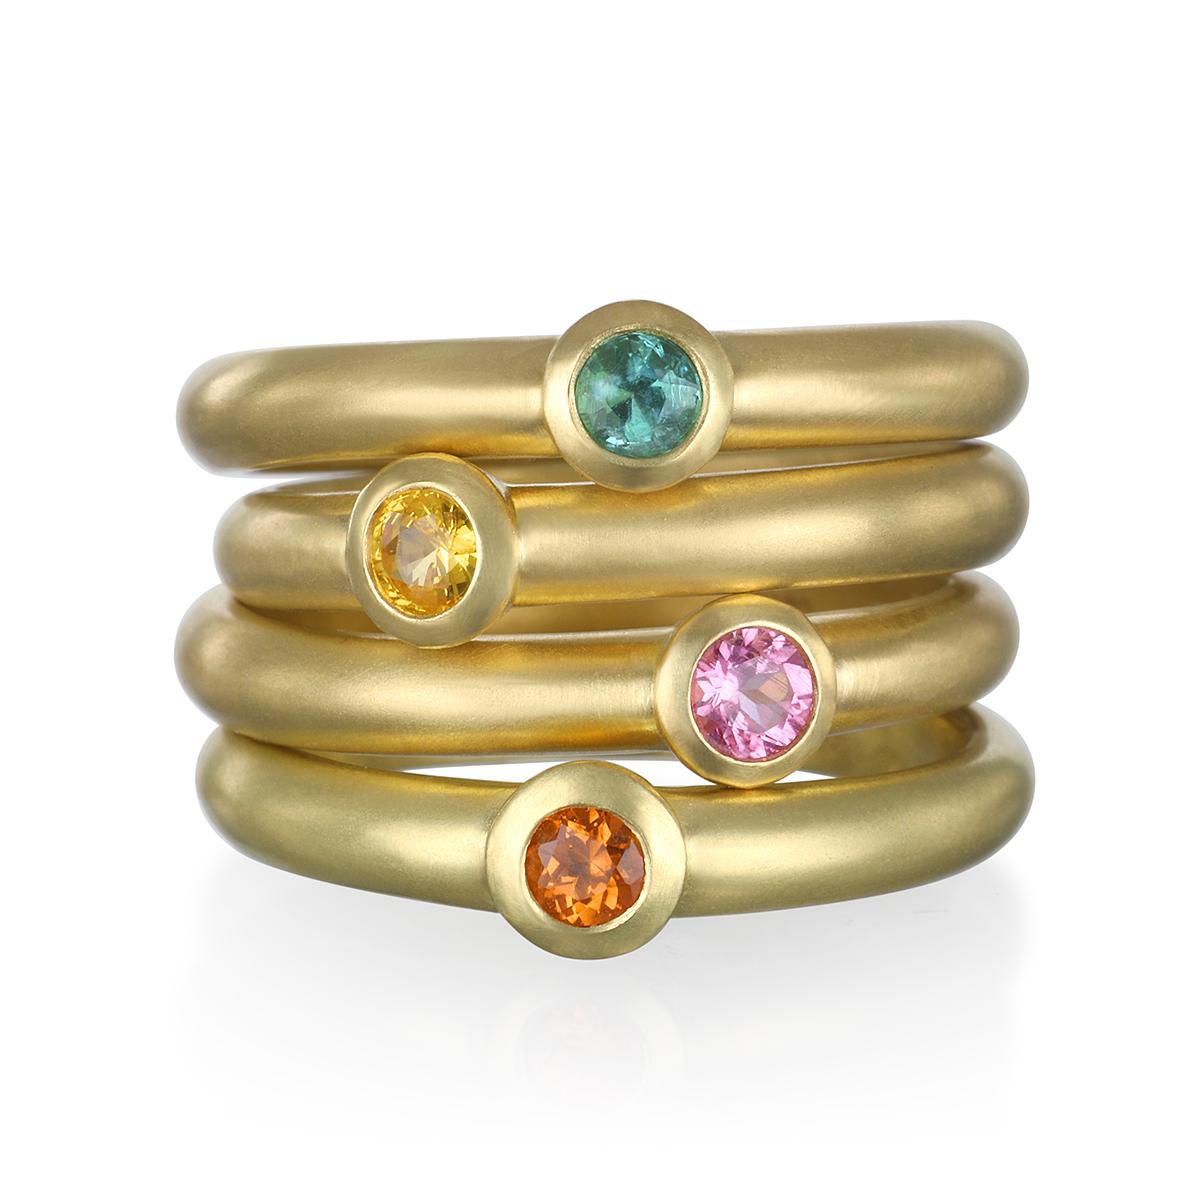 The perfect bright and simple, emerald stack ring. Beautifully crafted, bezel set and matte-finished.  Wear alone or stacked with other rings to elevate your individual style!

Handcrafted in 18k green gold, Faye Kim’s modern design conveys